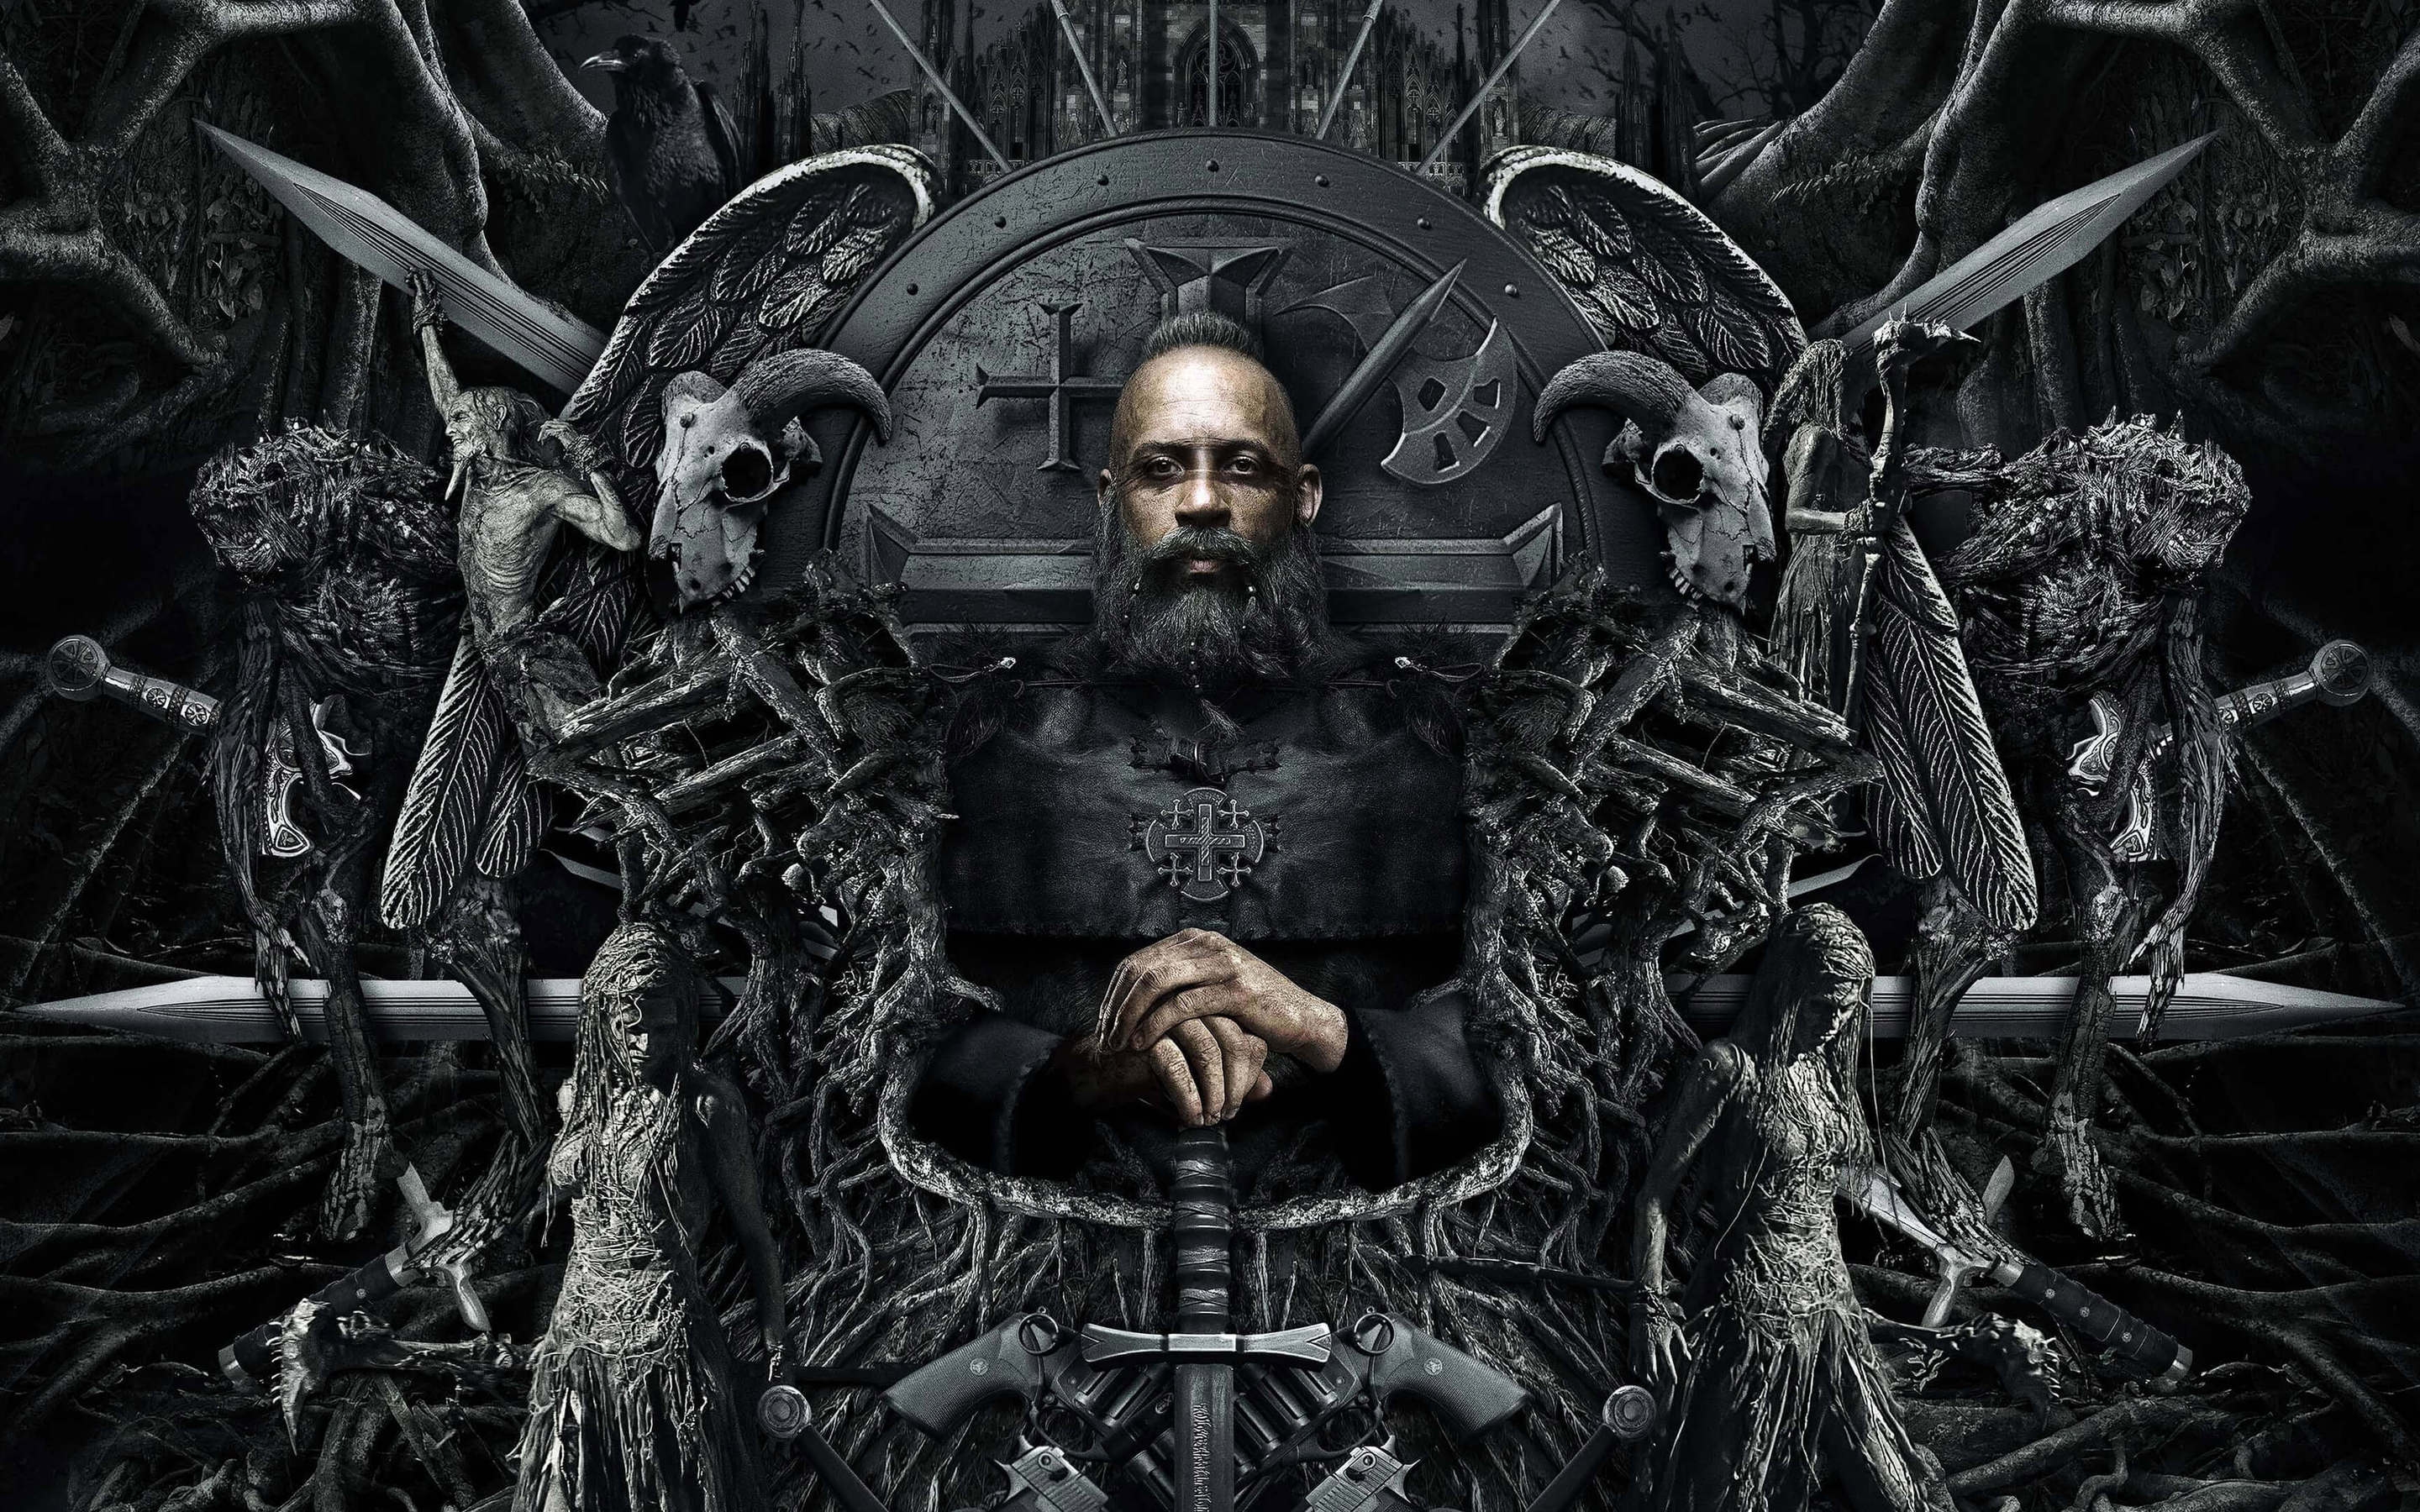 The Last Witch Hunter Throne for 2880 x 1800 Retina Display resolution